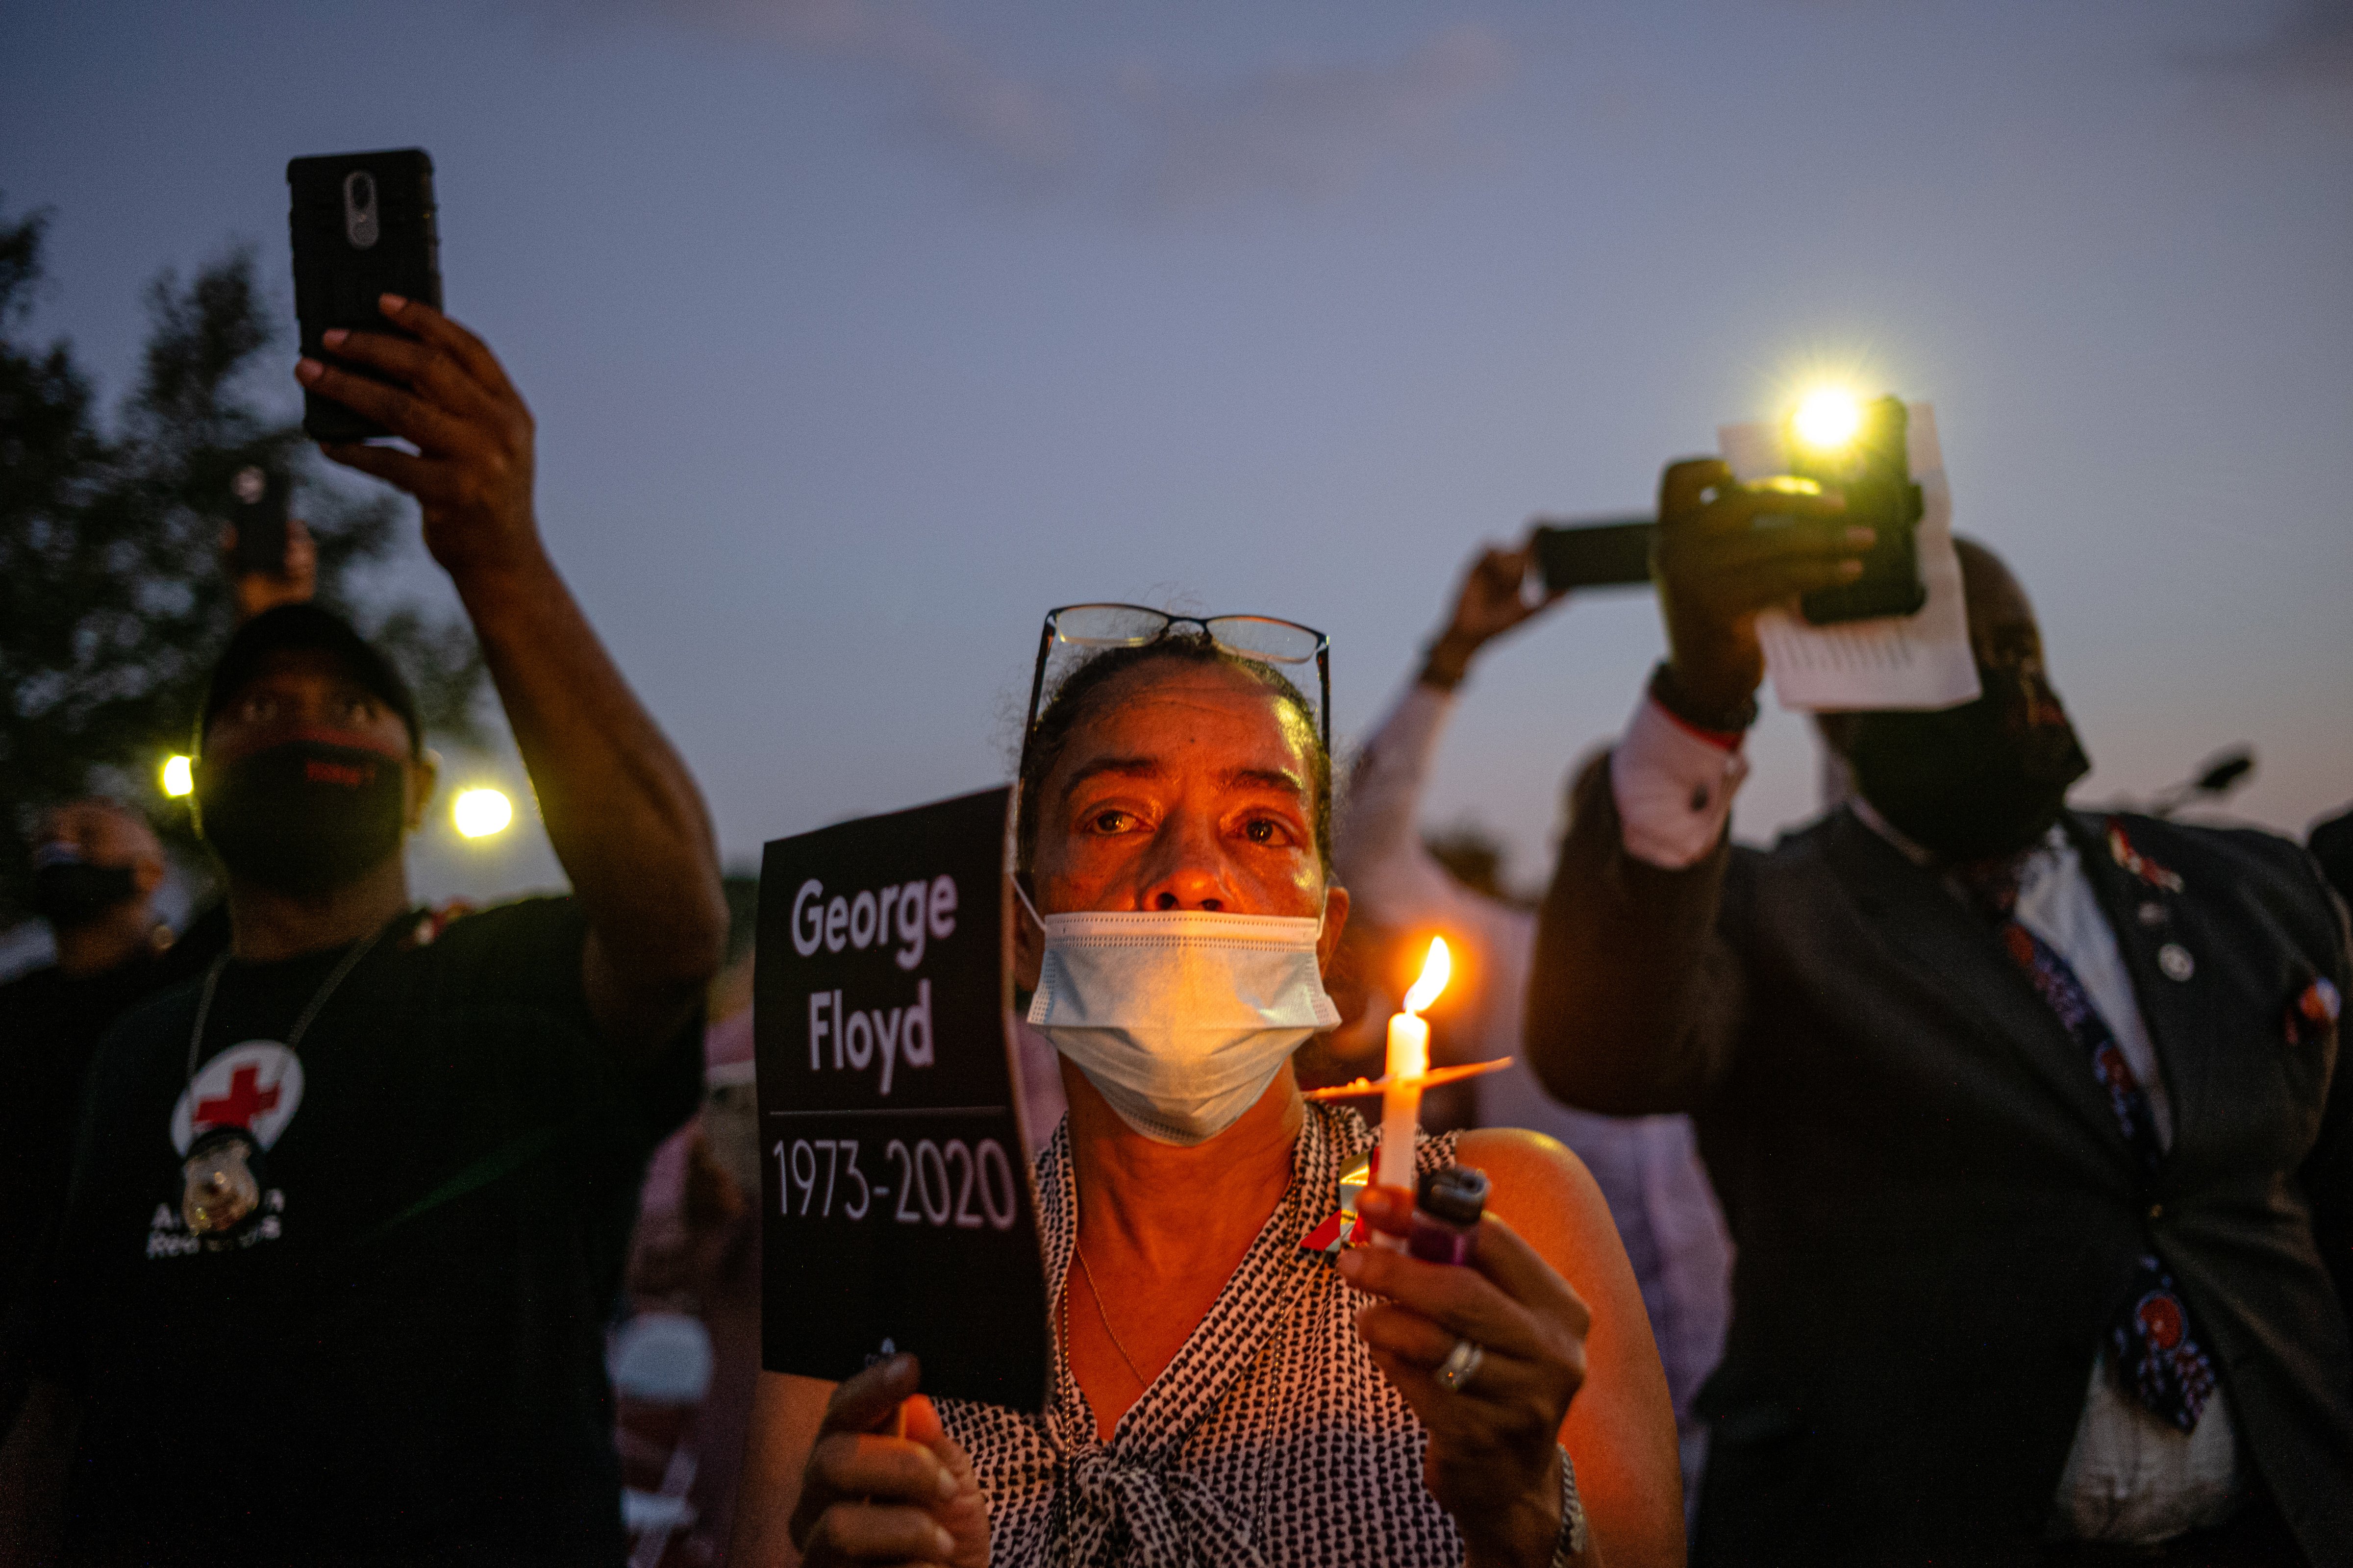 Attendees at a candlelight vigil honoring George Floyd at Jack Yates High School in Houston on June 8. (Ruddy Roye for TIME)